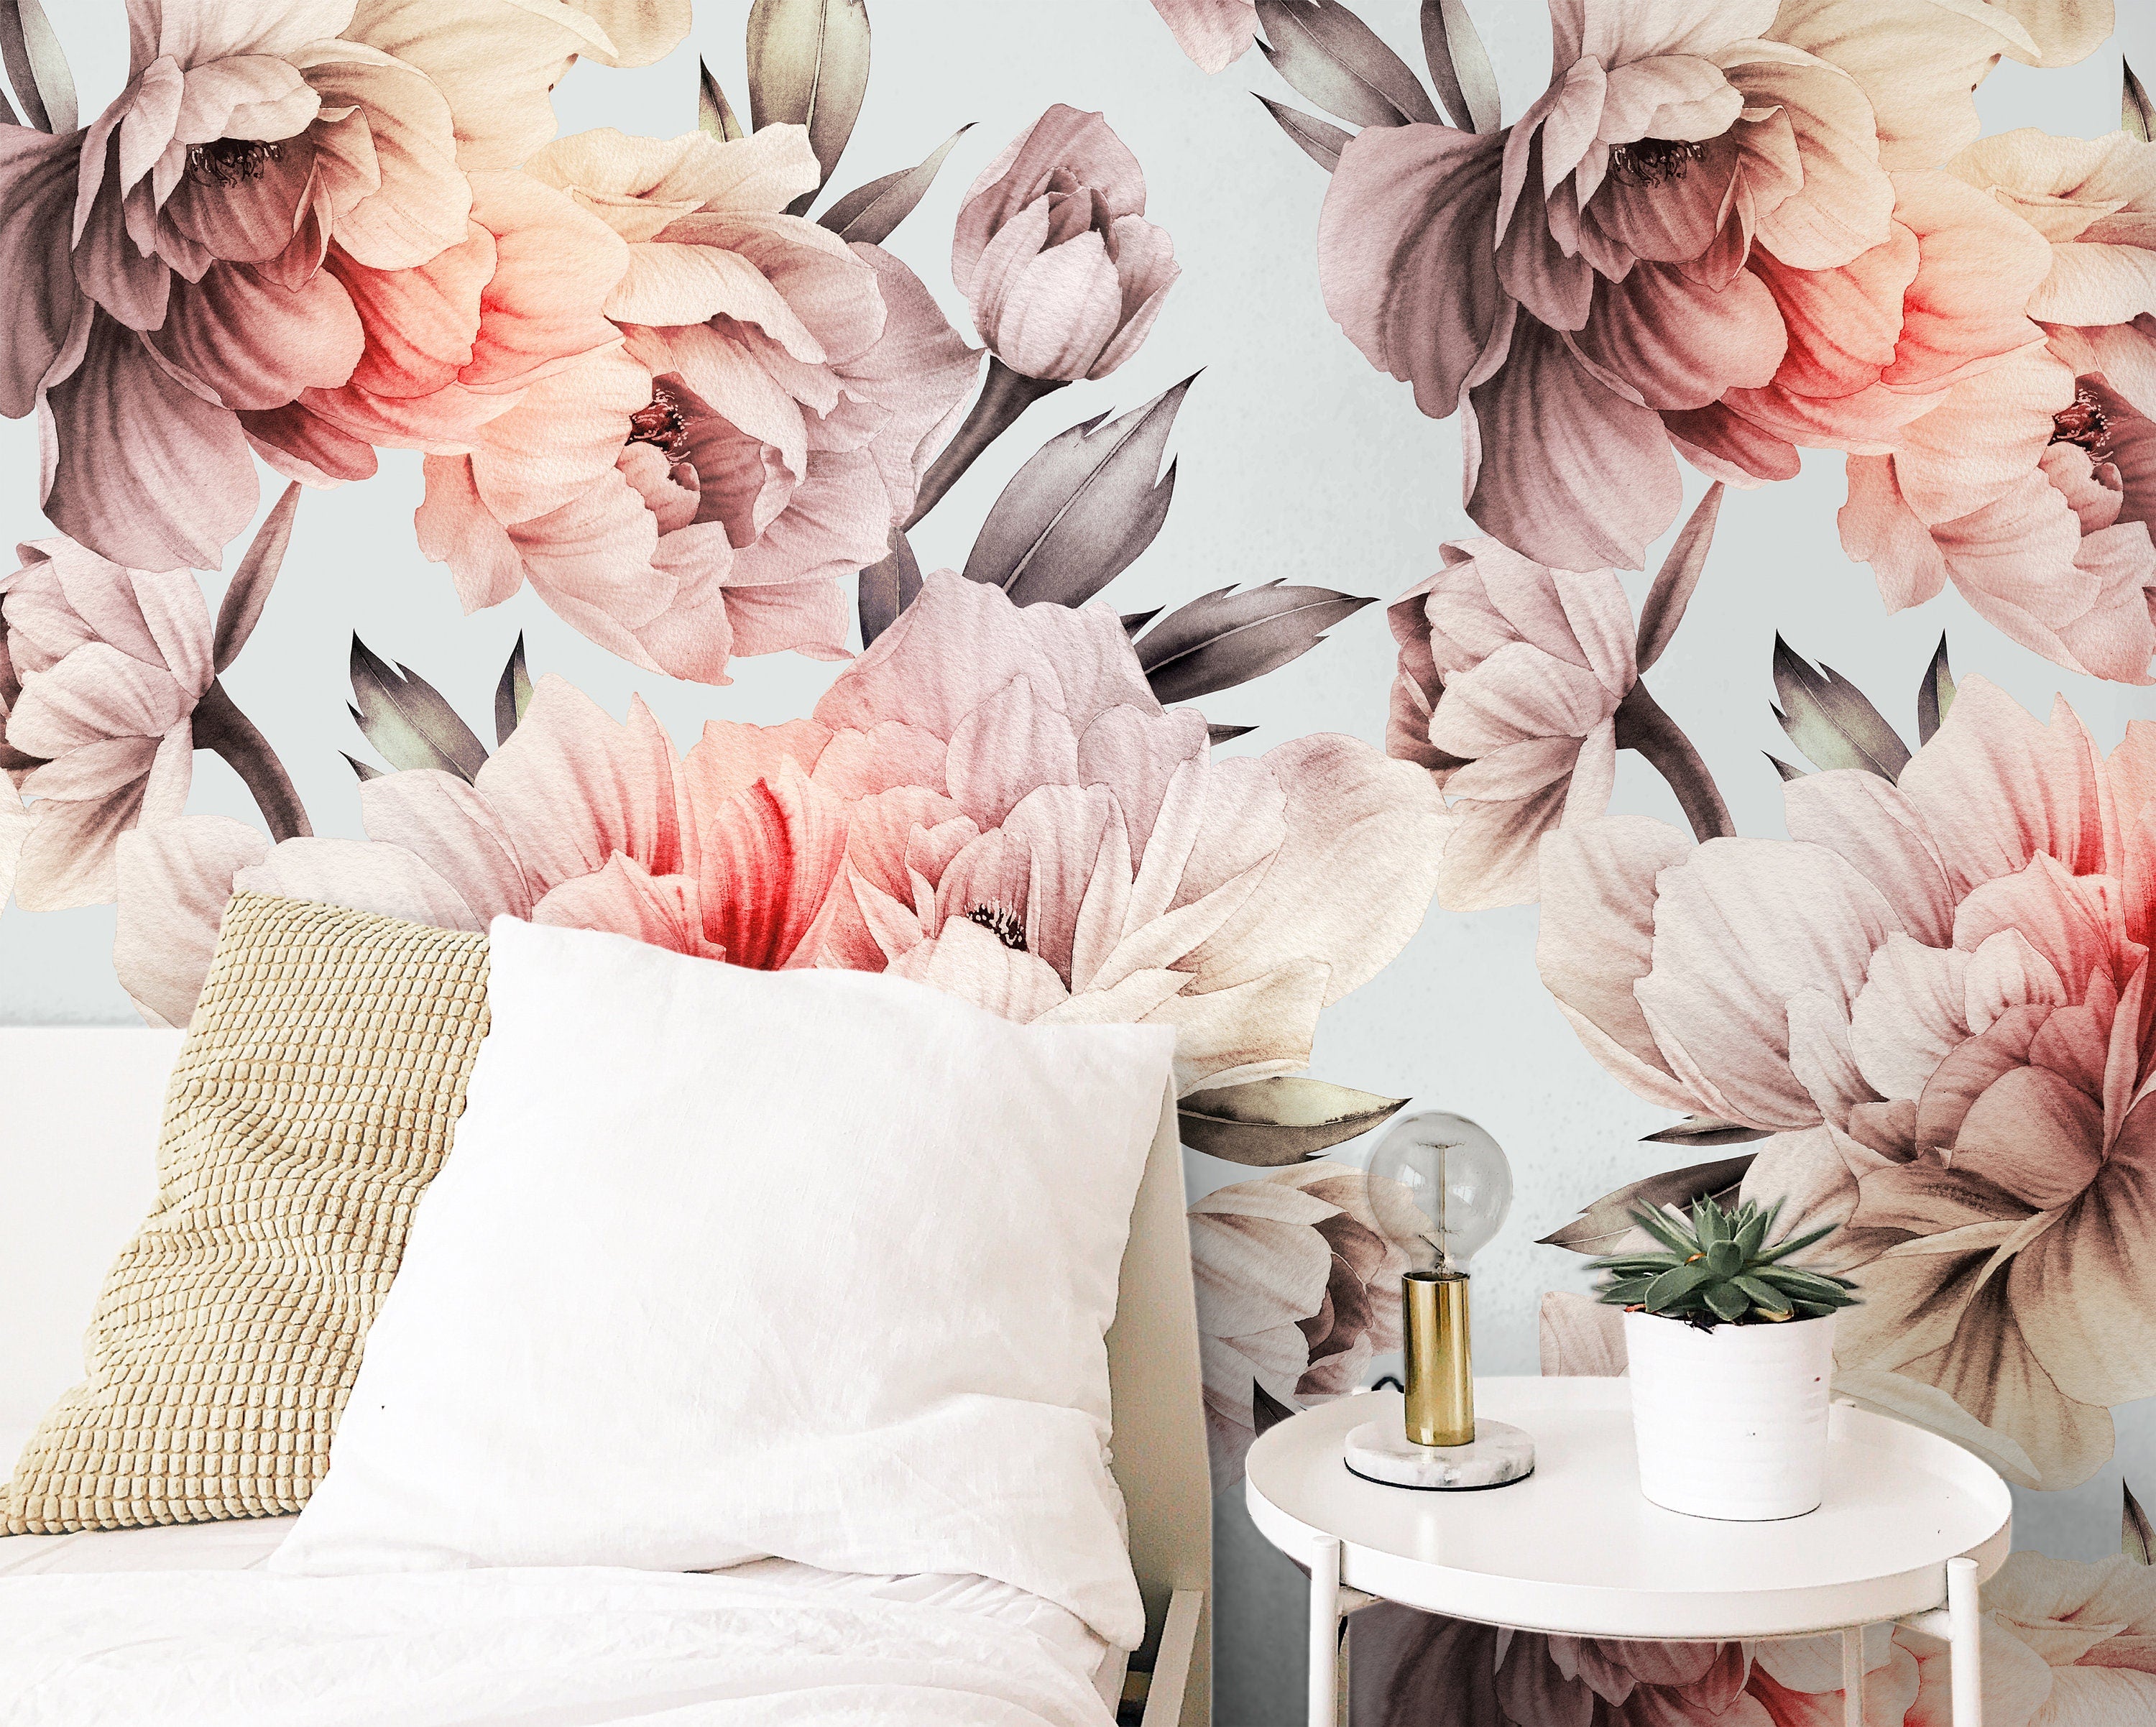 Large Floral Mural Wallpaper | Removable Wallpaper | Peel And Stick Wallpaper | Adhesive Wallpaper | Wall Paper Peel Stick Wall Mural 3668 - JamesAndColors